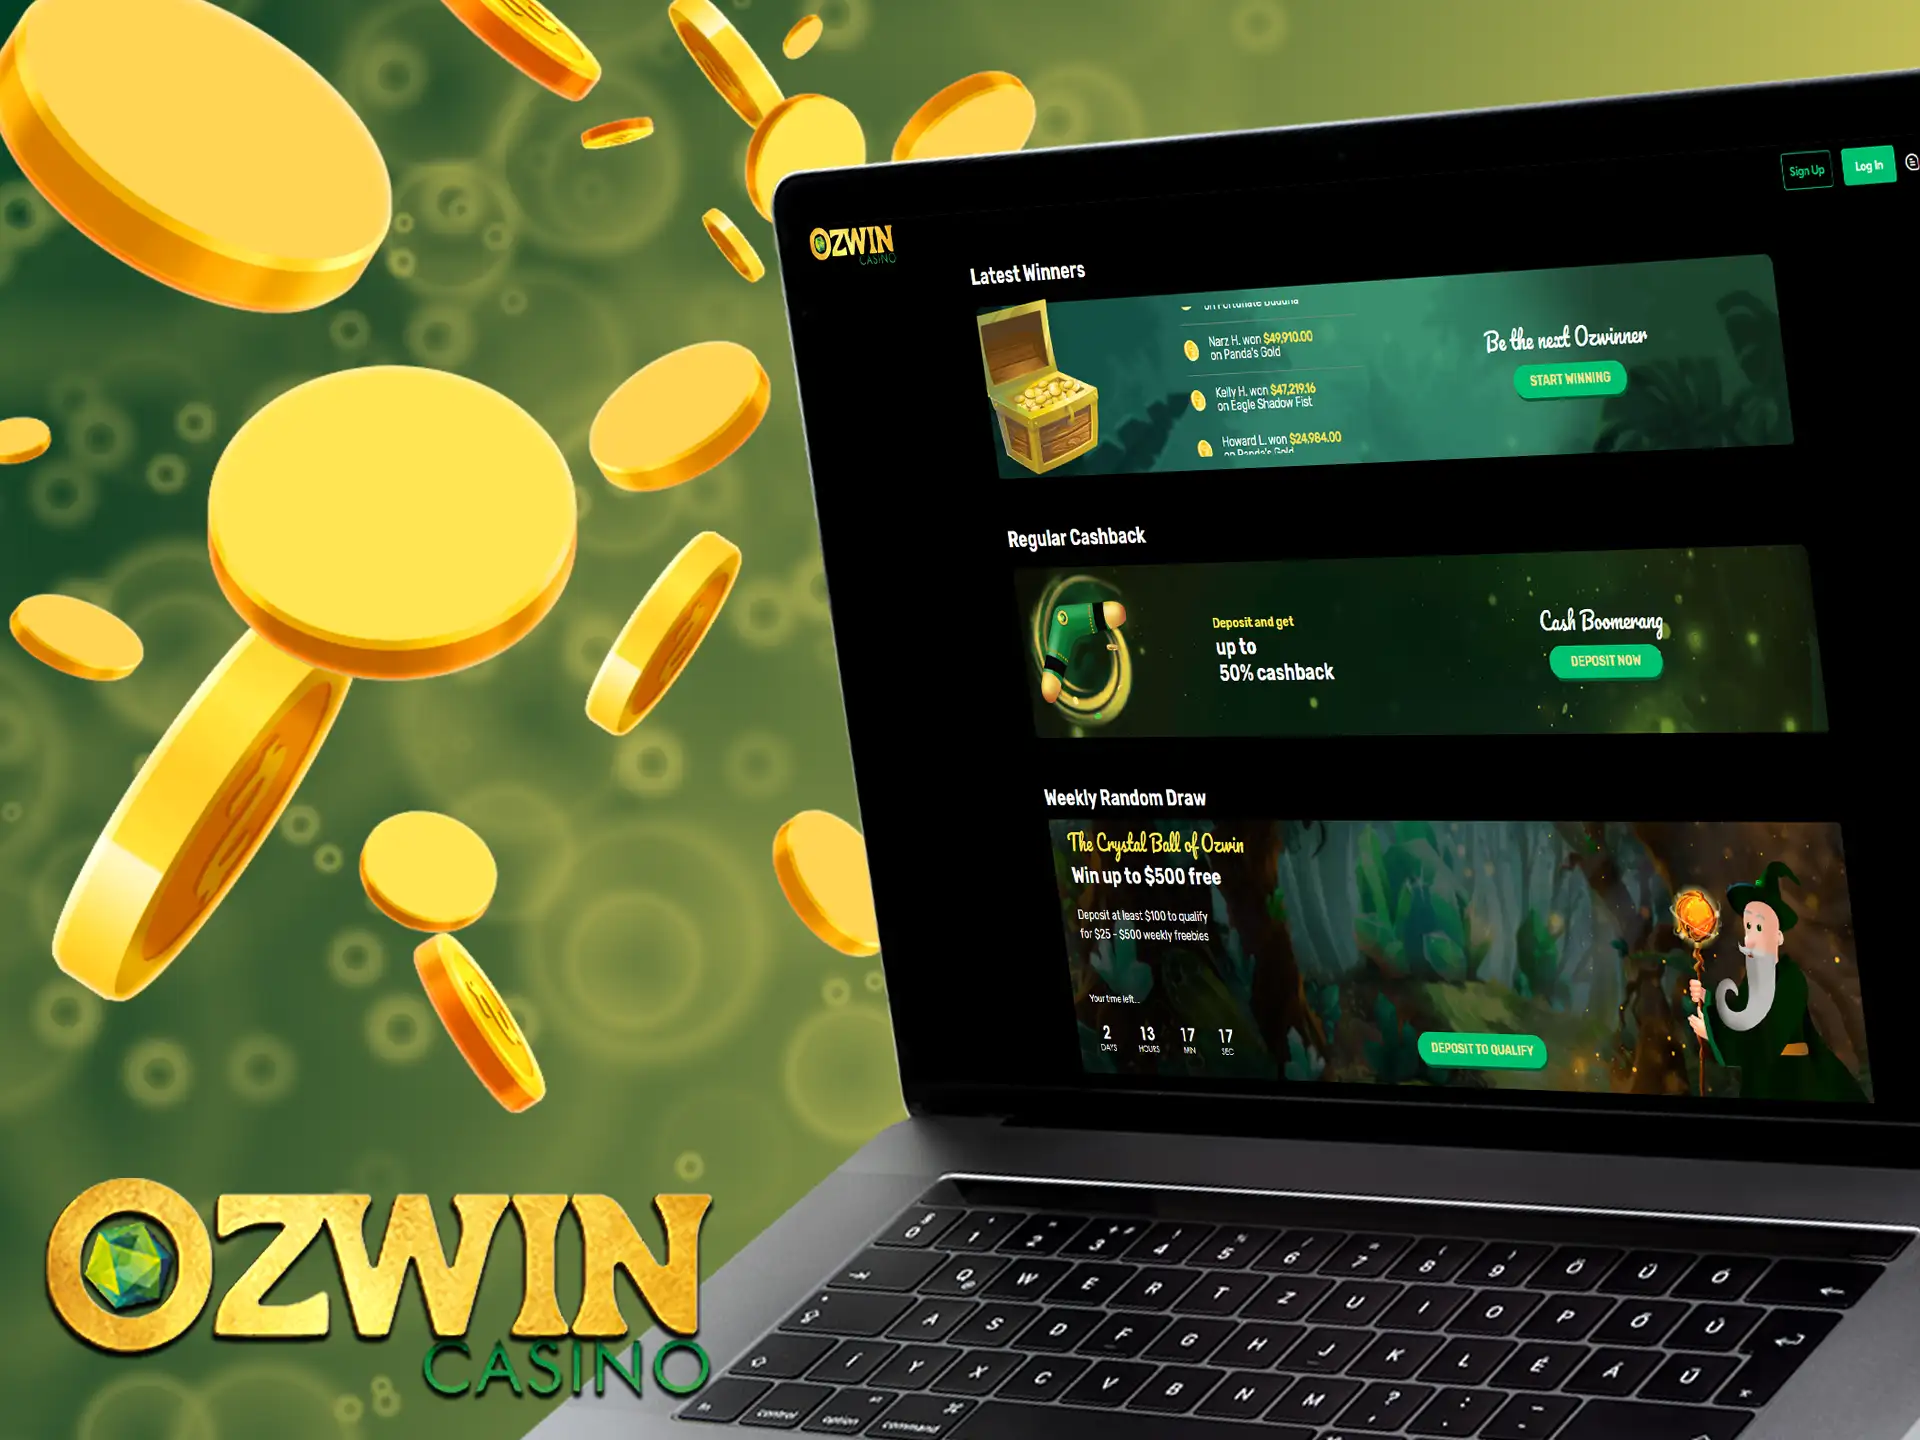 Ozwin Casino also offers generous cashback for first time depositors.